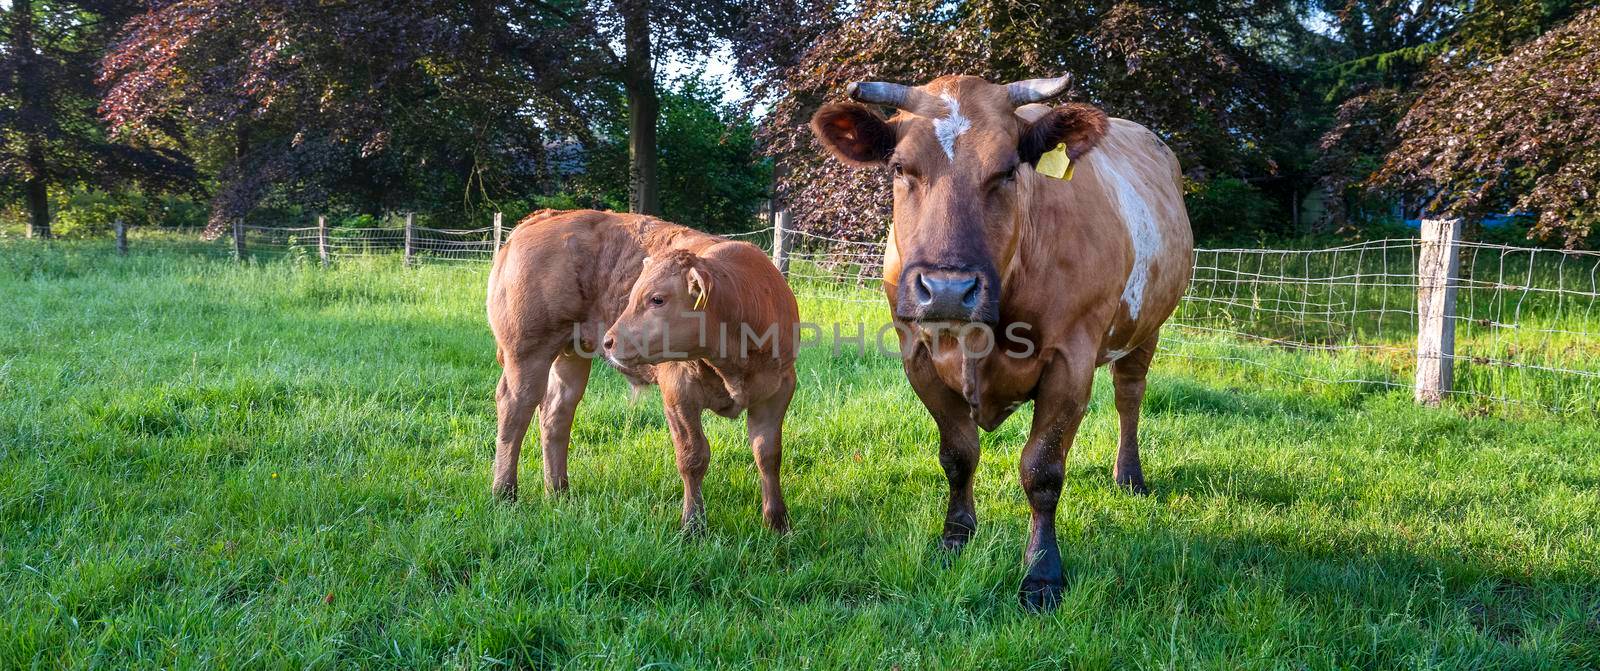 beef cow and brown calf together in green meadow near beech trees in the netherlands on utrechtse heuvelrug